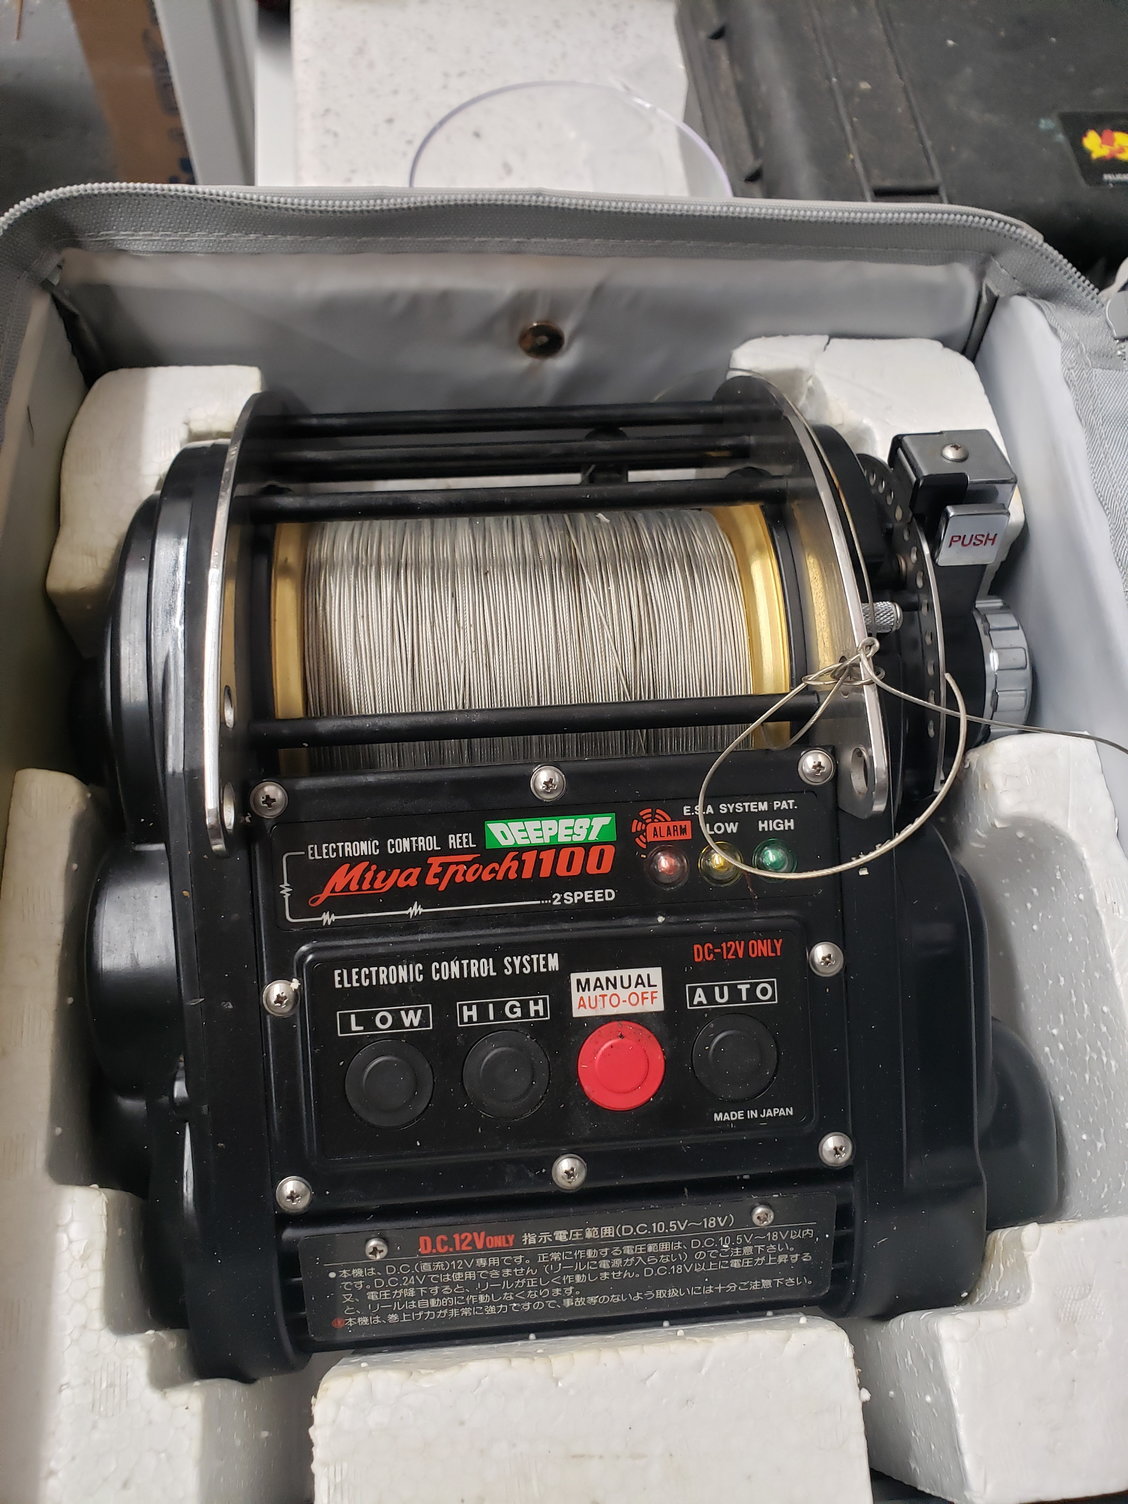 KRISTAL XL 601 Electric reel - The Hull Truth - Boating and